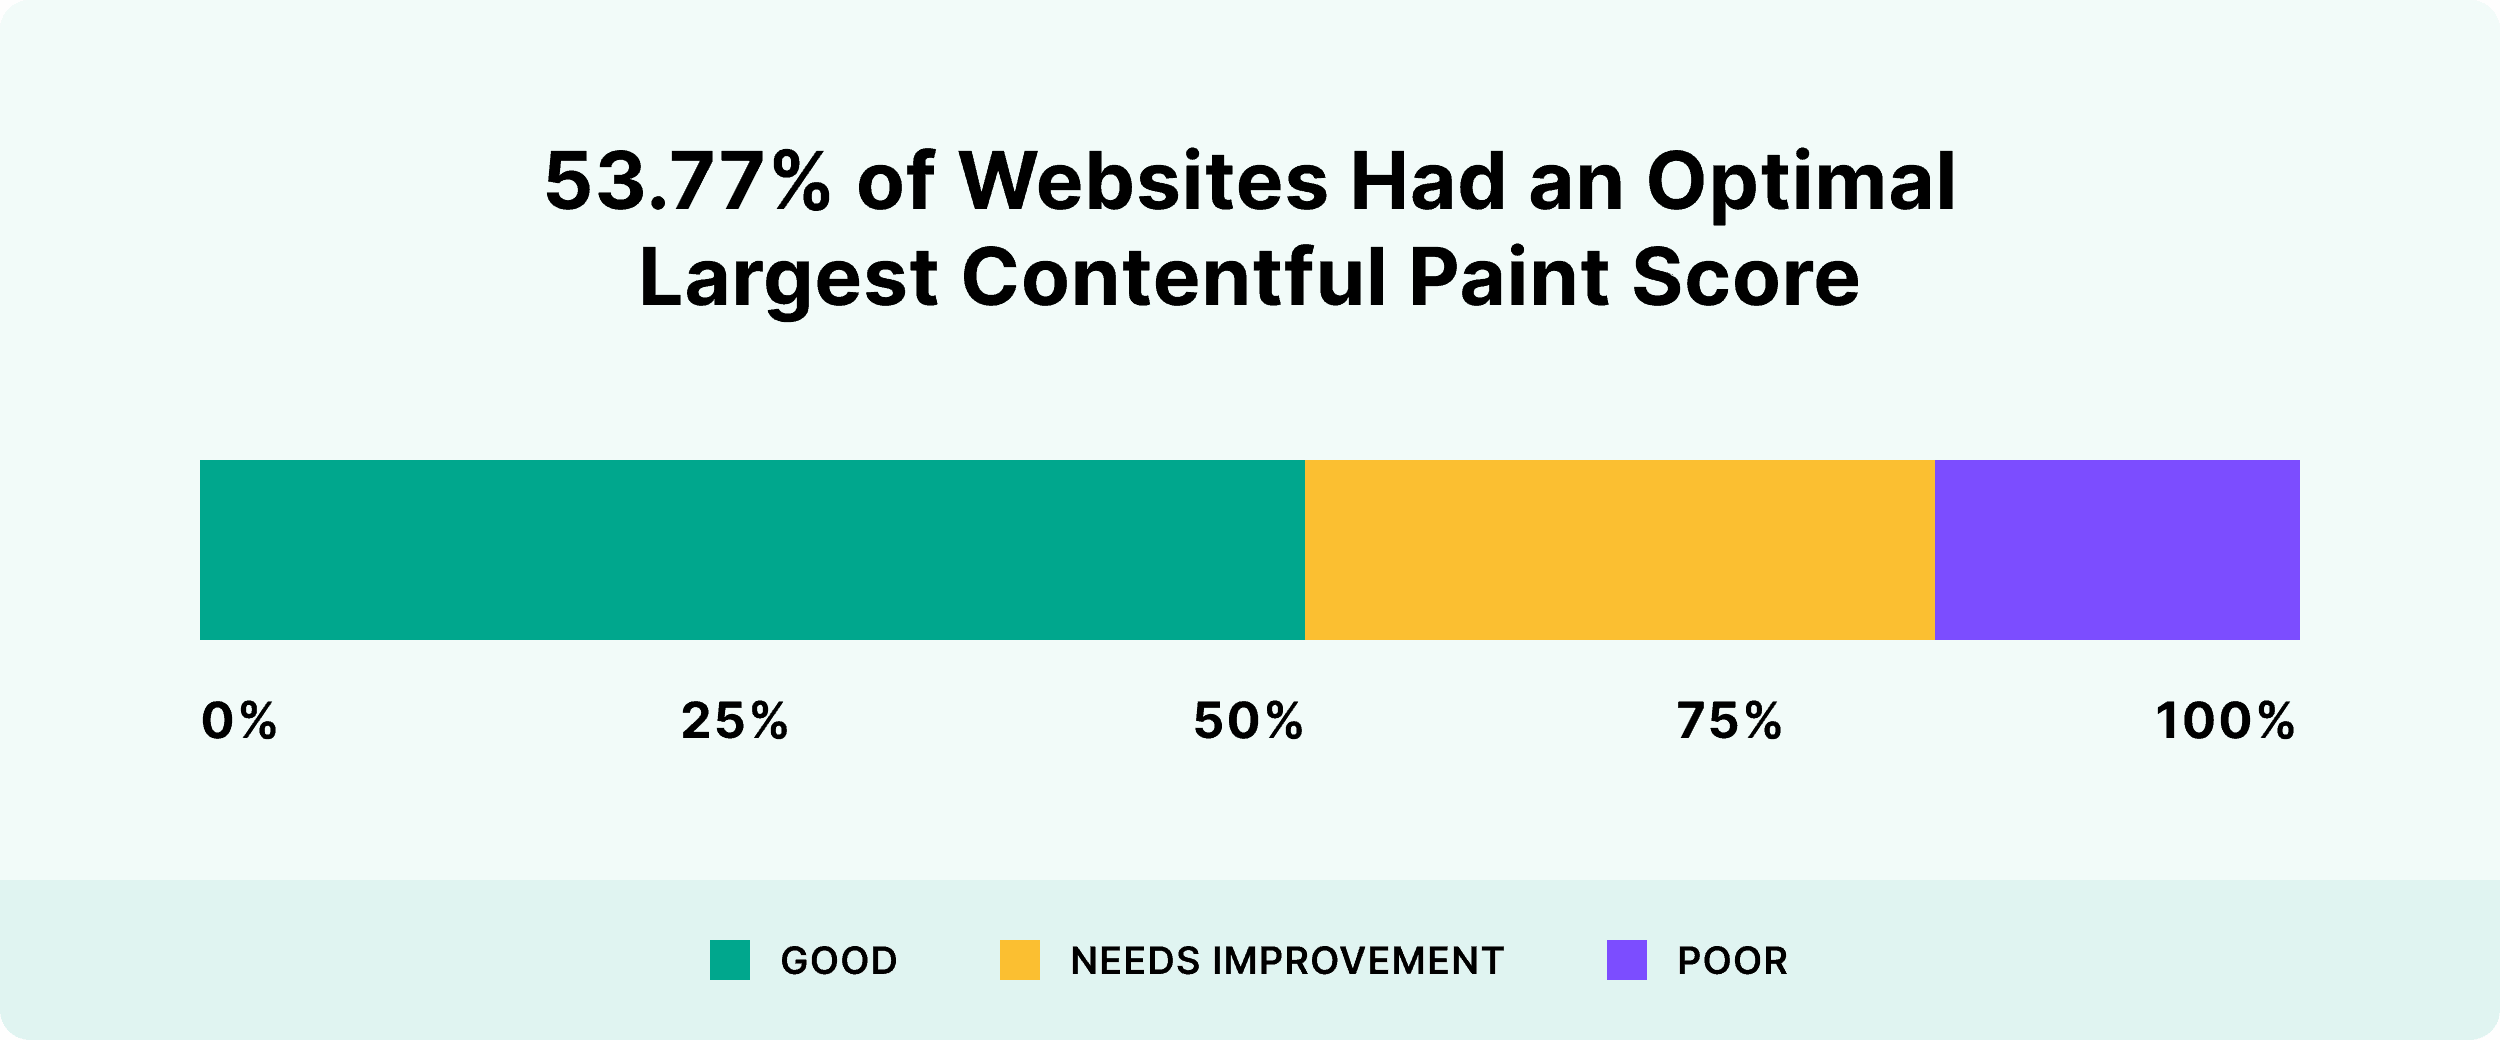 53.77% of websites had an optimal largest contentful paint score